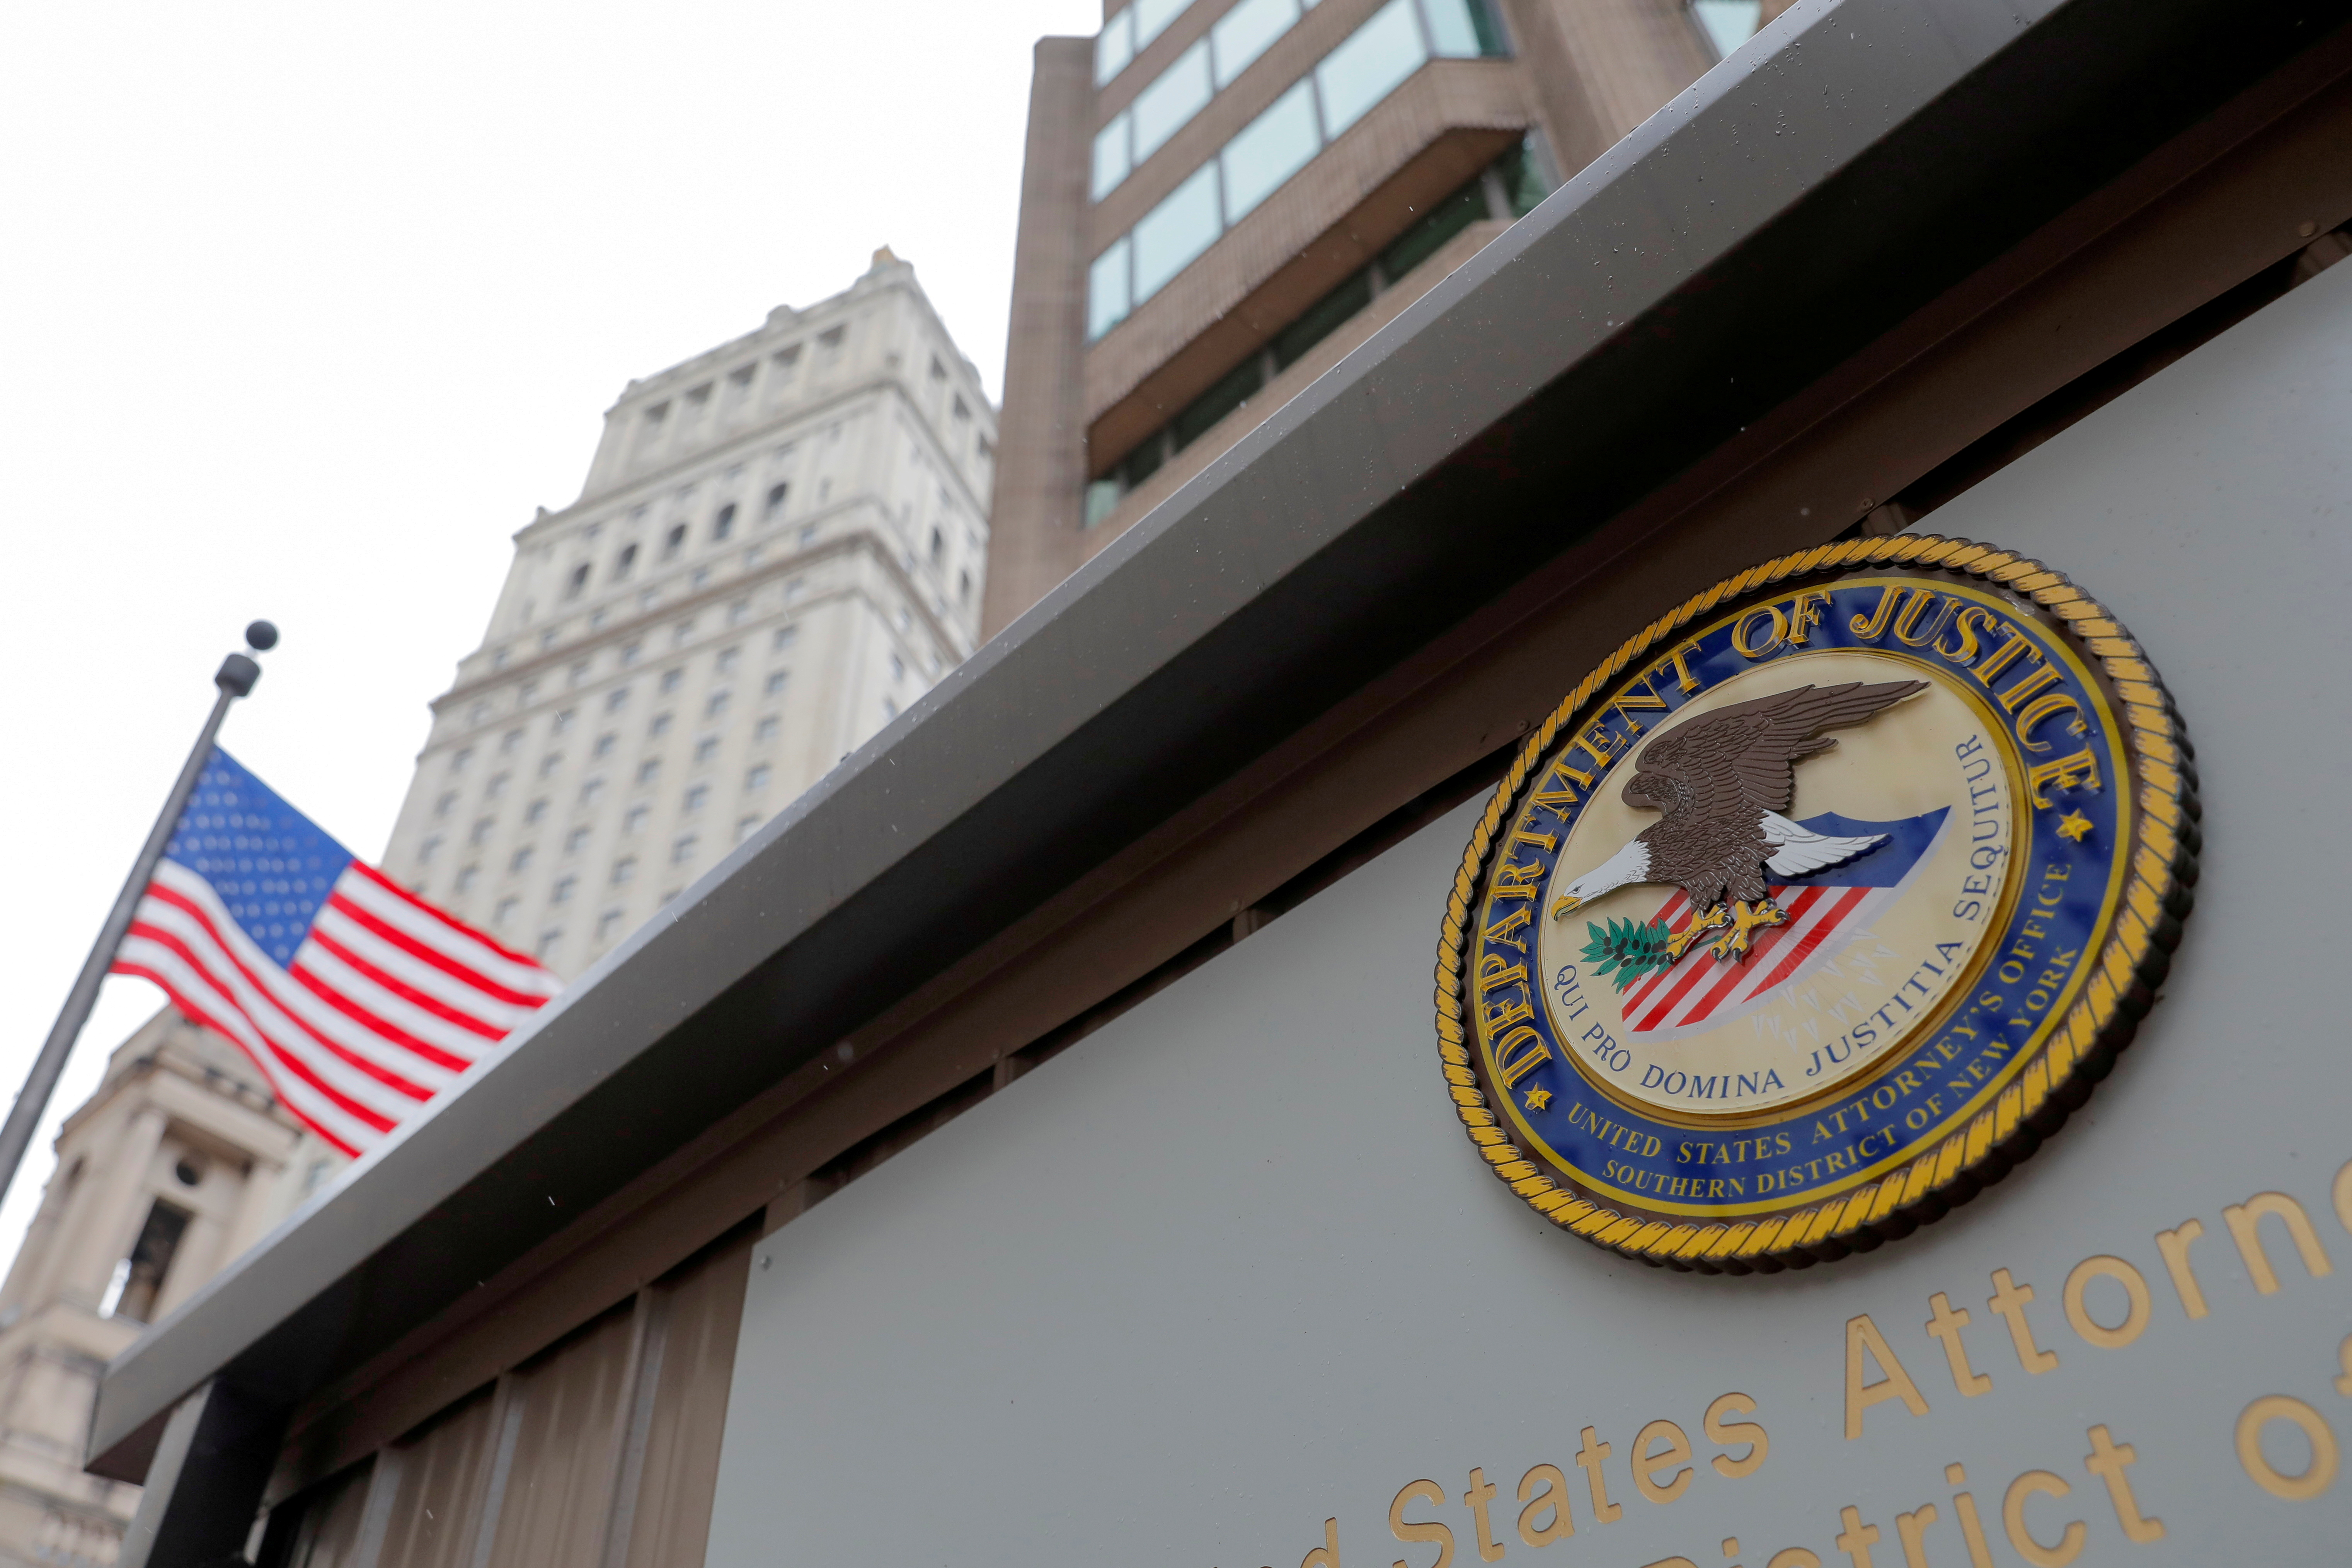 The seal of the United States Department of Justice is seen on the building exterior of the United States Attorney's Office of the Southern District of New York in Manhattan, New York City, U.S., August 17, 2020. REUTERS/Andrew Kelly